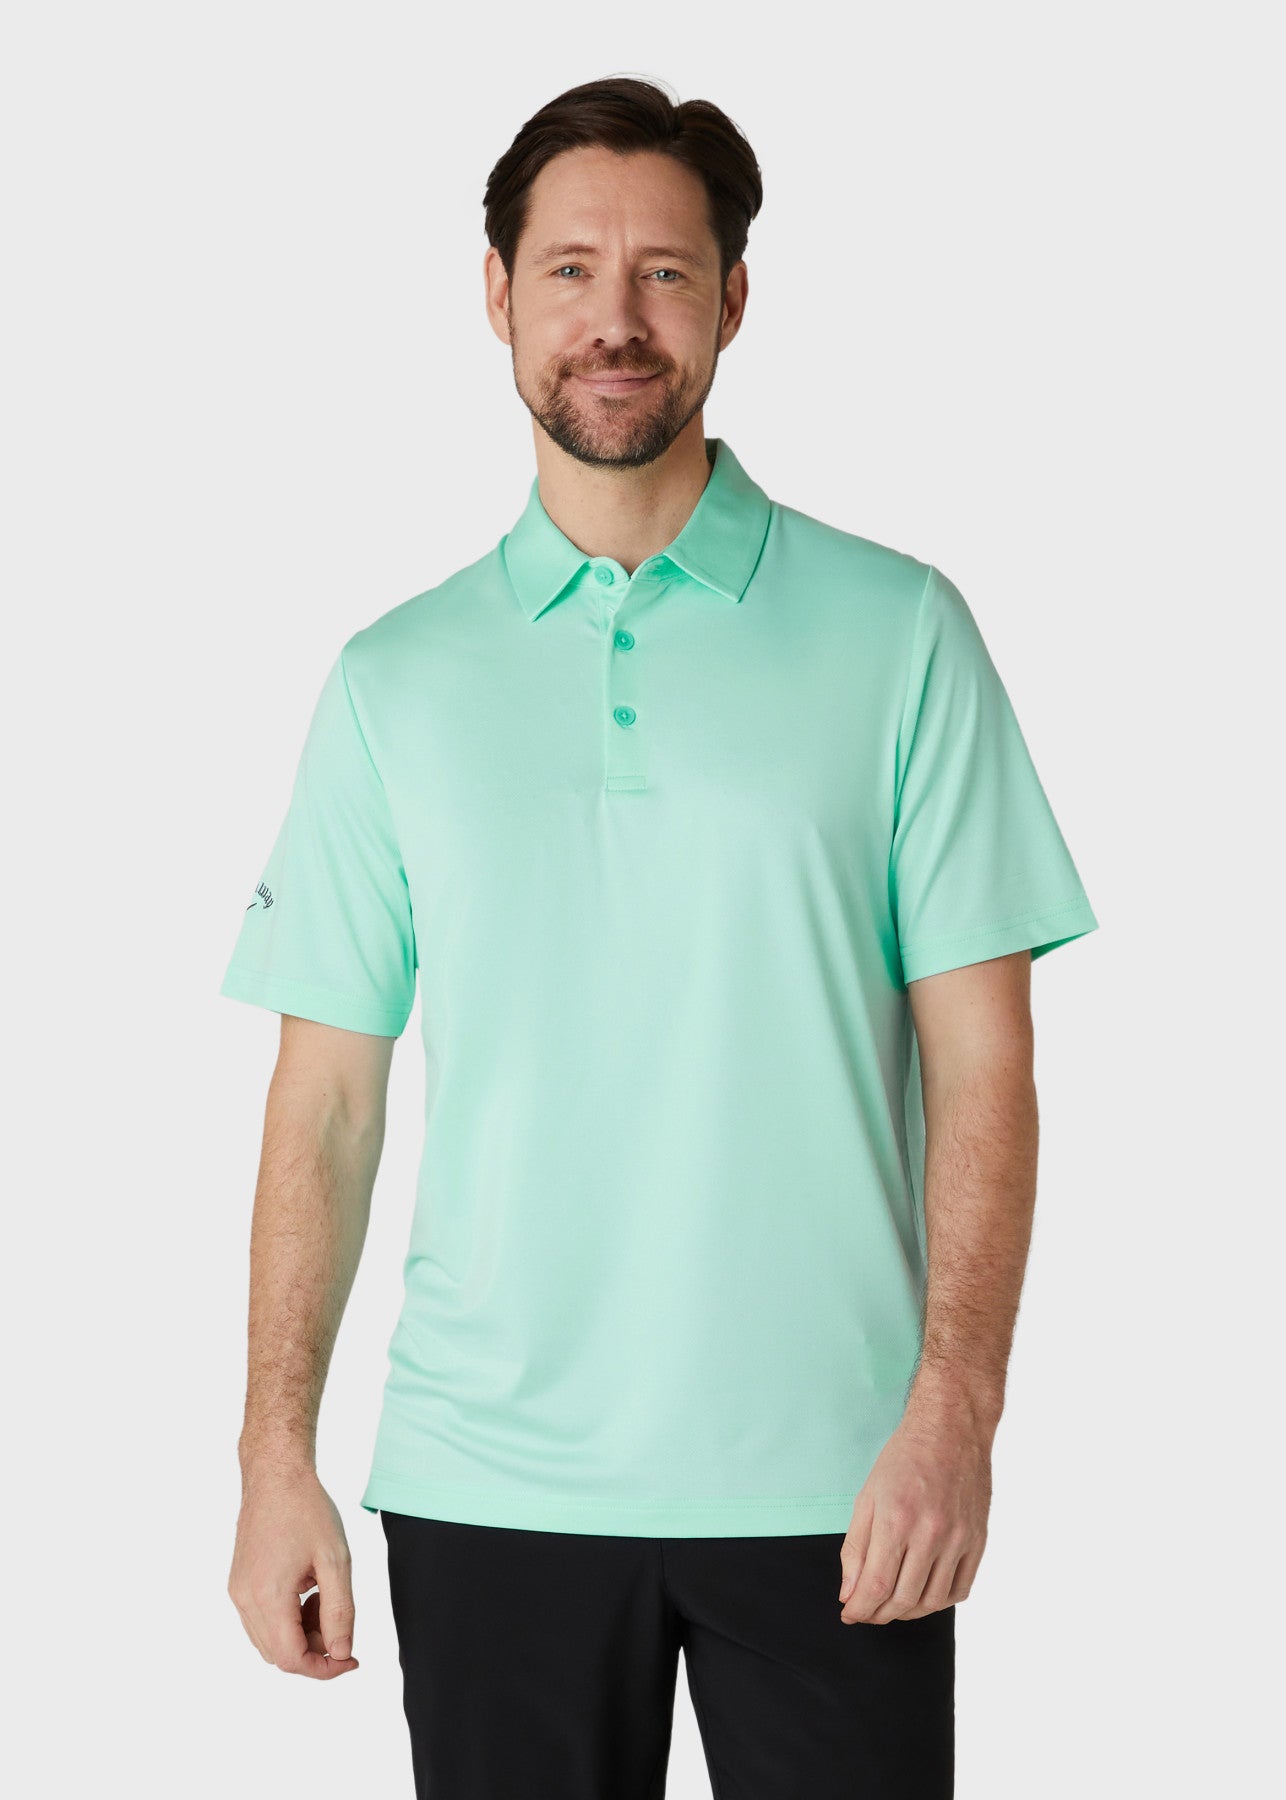 View Solid Swing Tech Short Sleeve Golf Polo Shirt In Limpet Shell information